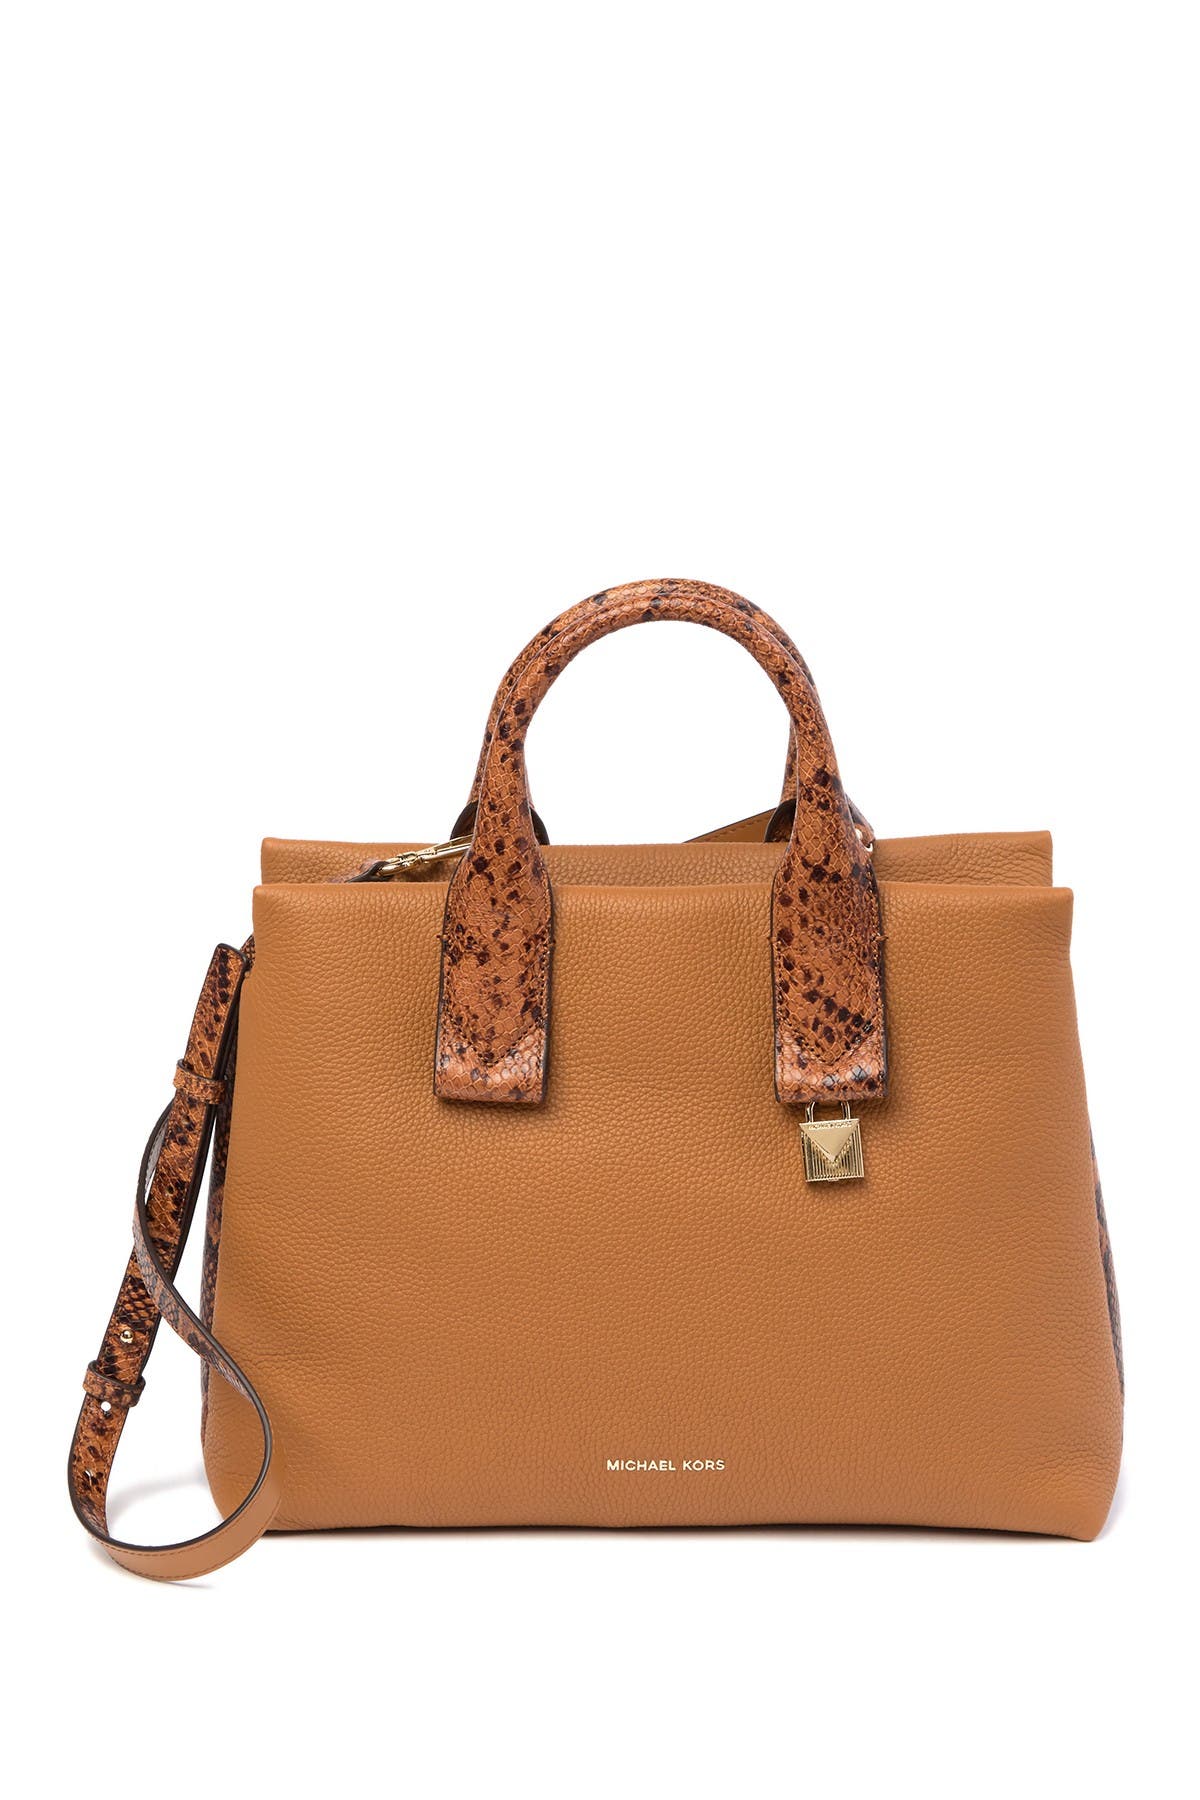 rollins large pebbled leather satchel by michael kors